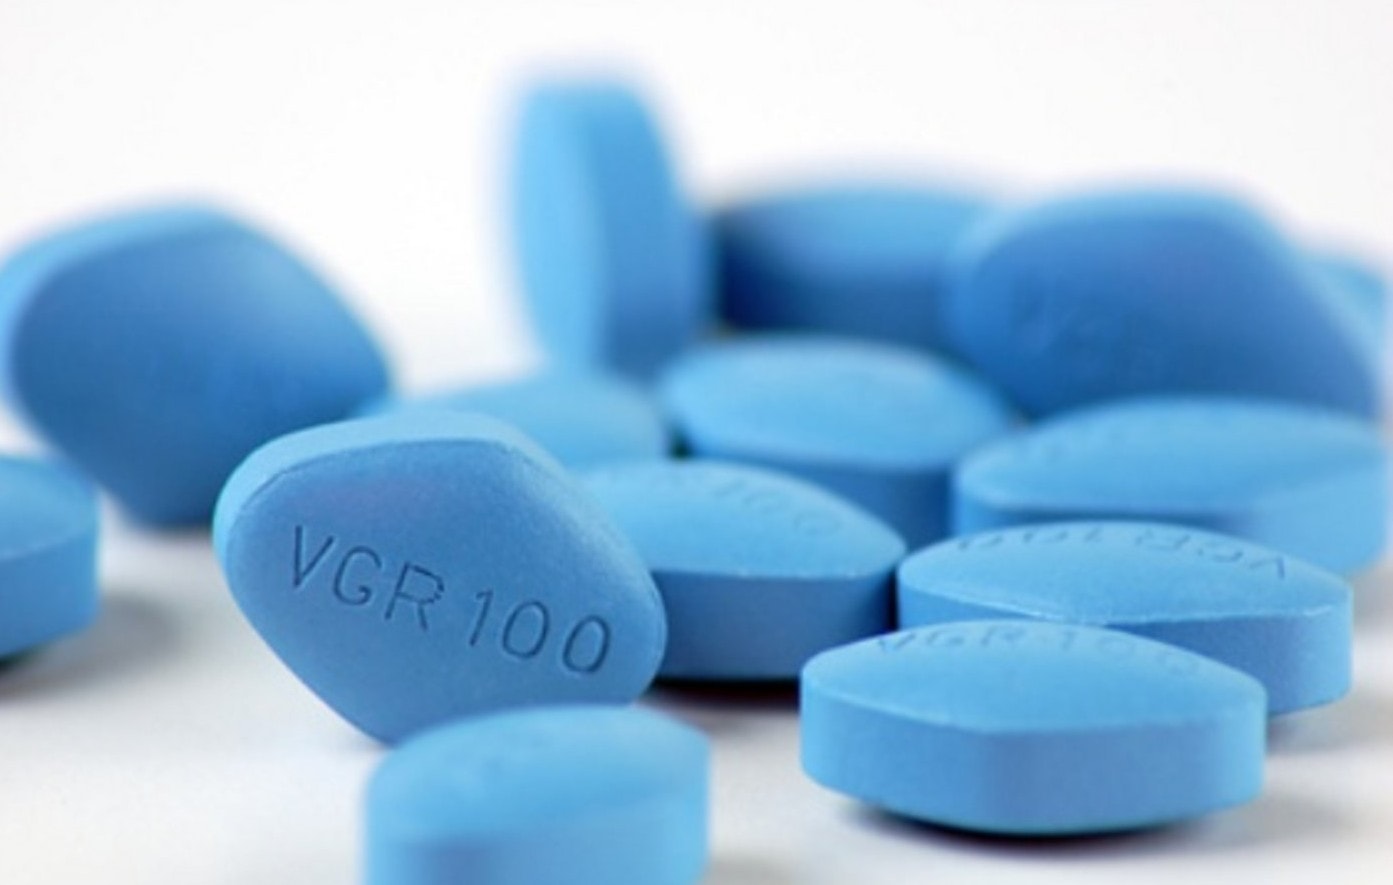 19 Ways To Use Viagra That Will Leave You Open-Mouthed